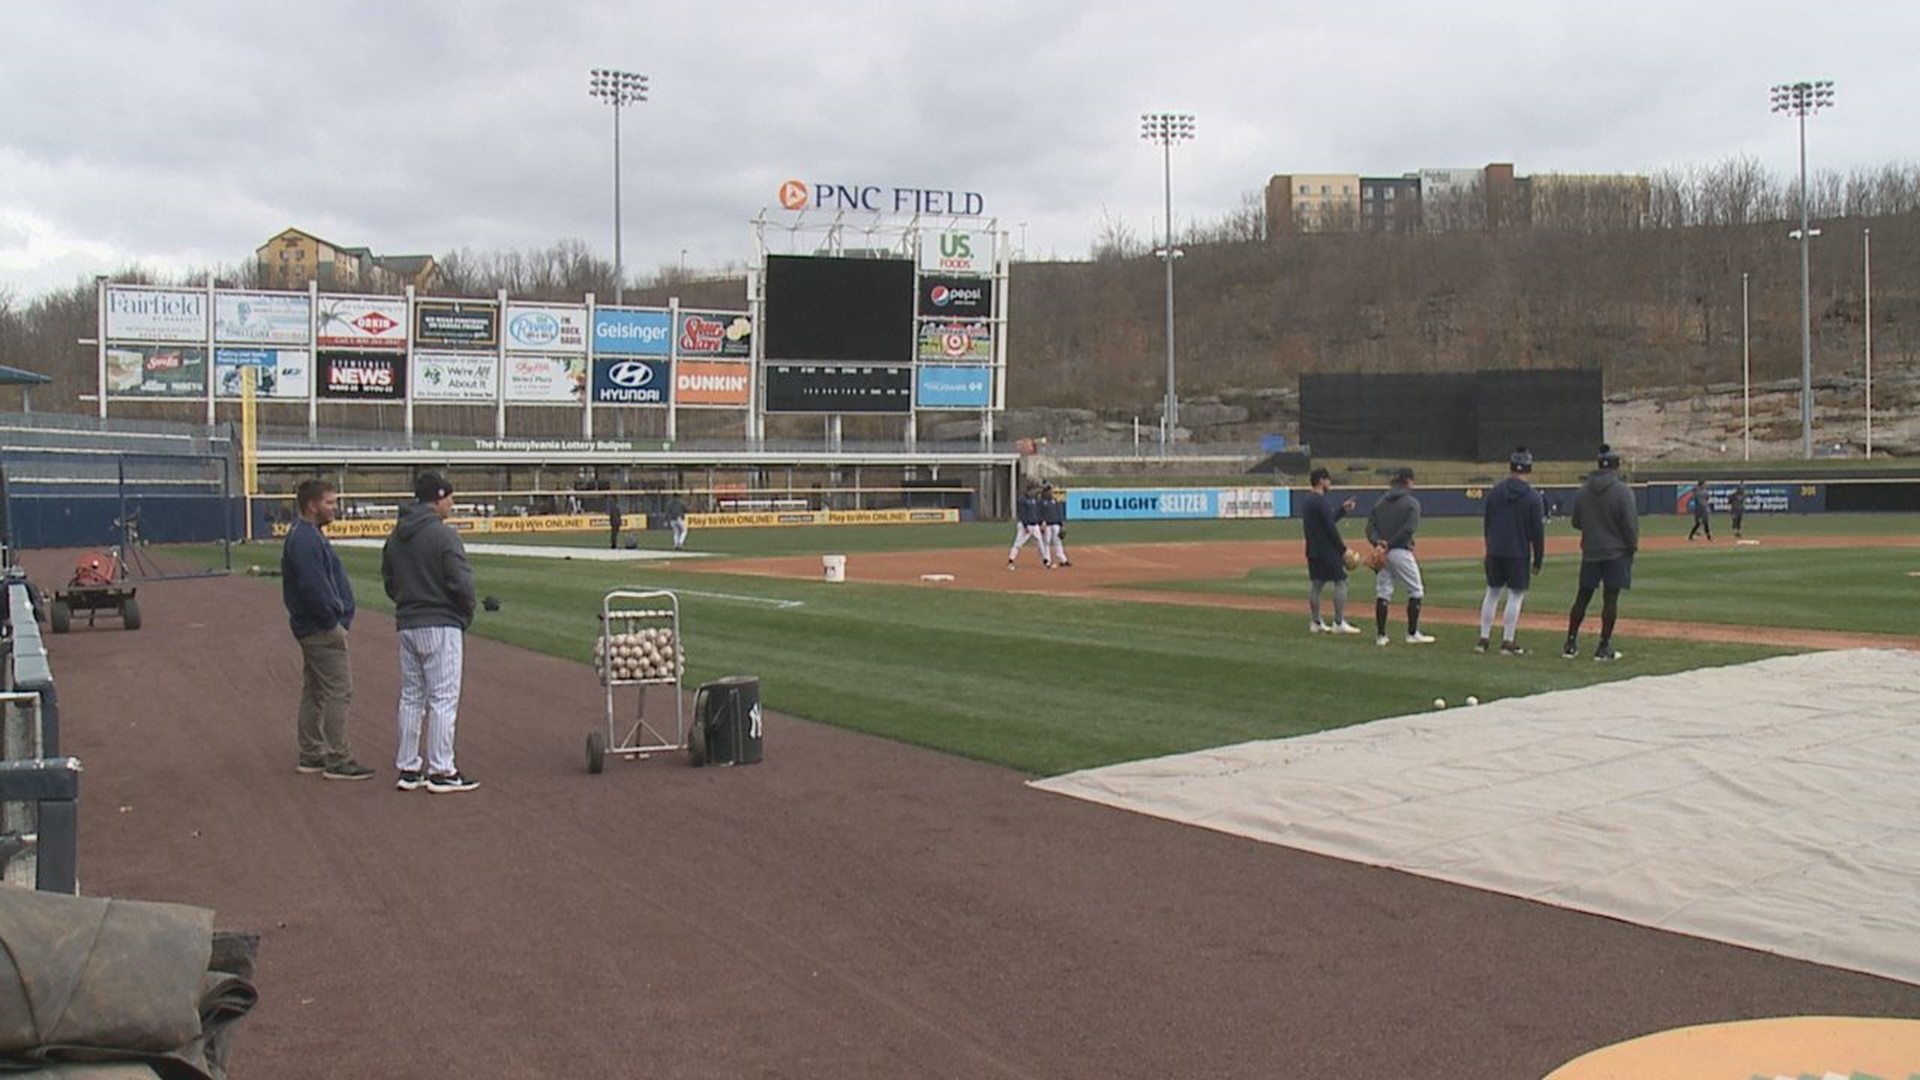 Yankees Prospects Hope to Impress with RailRiders this Season